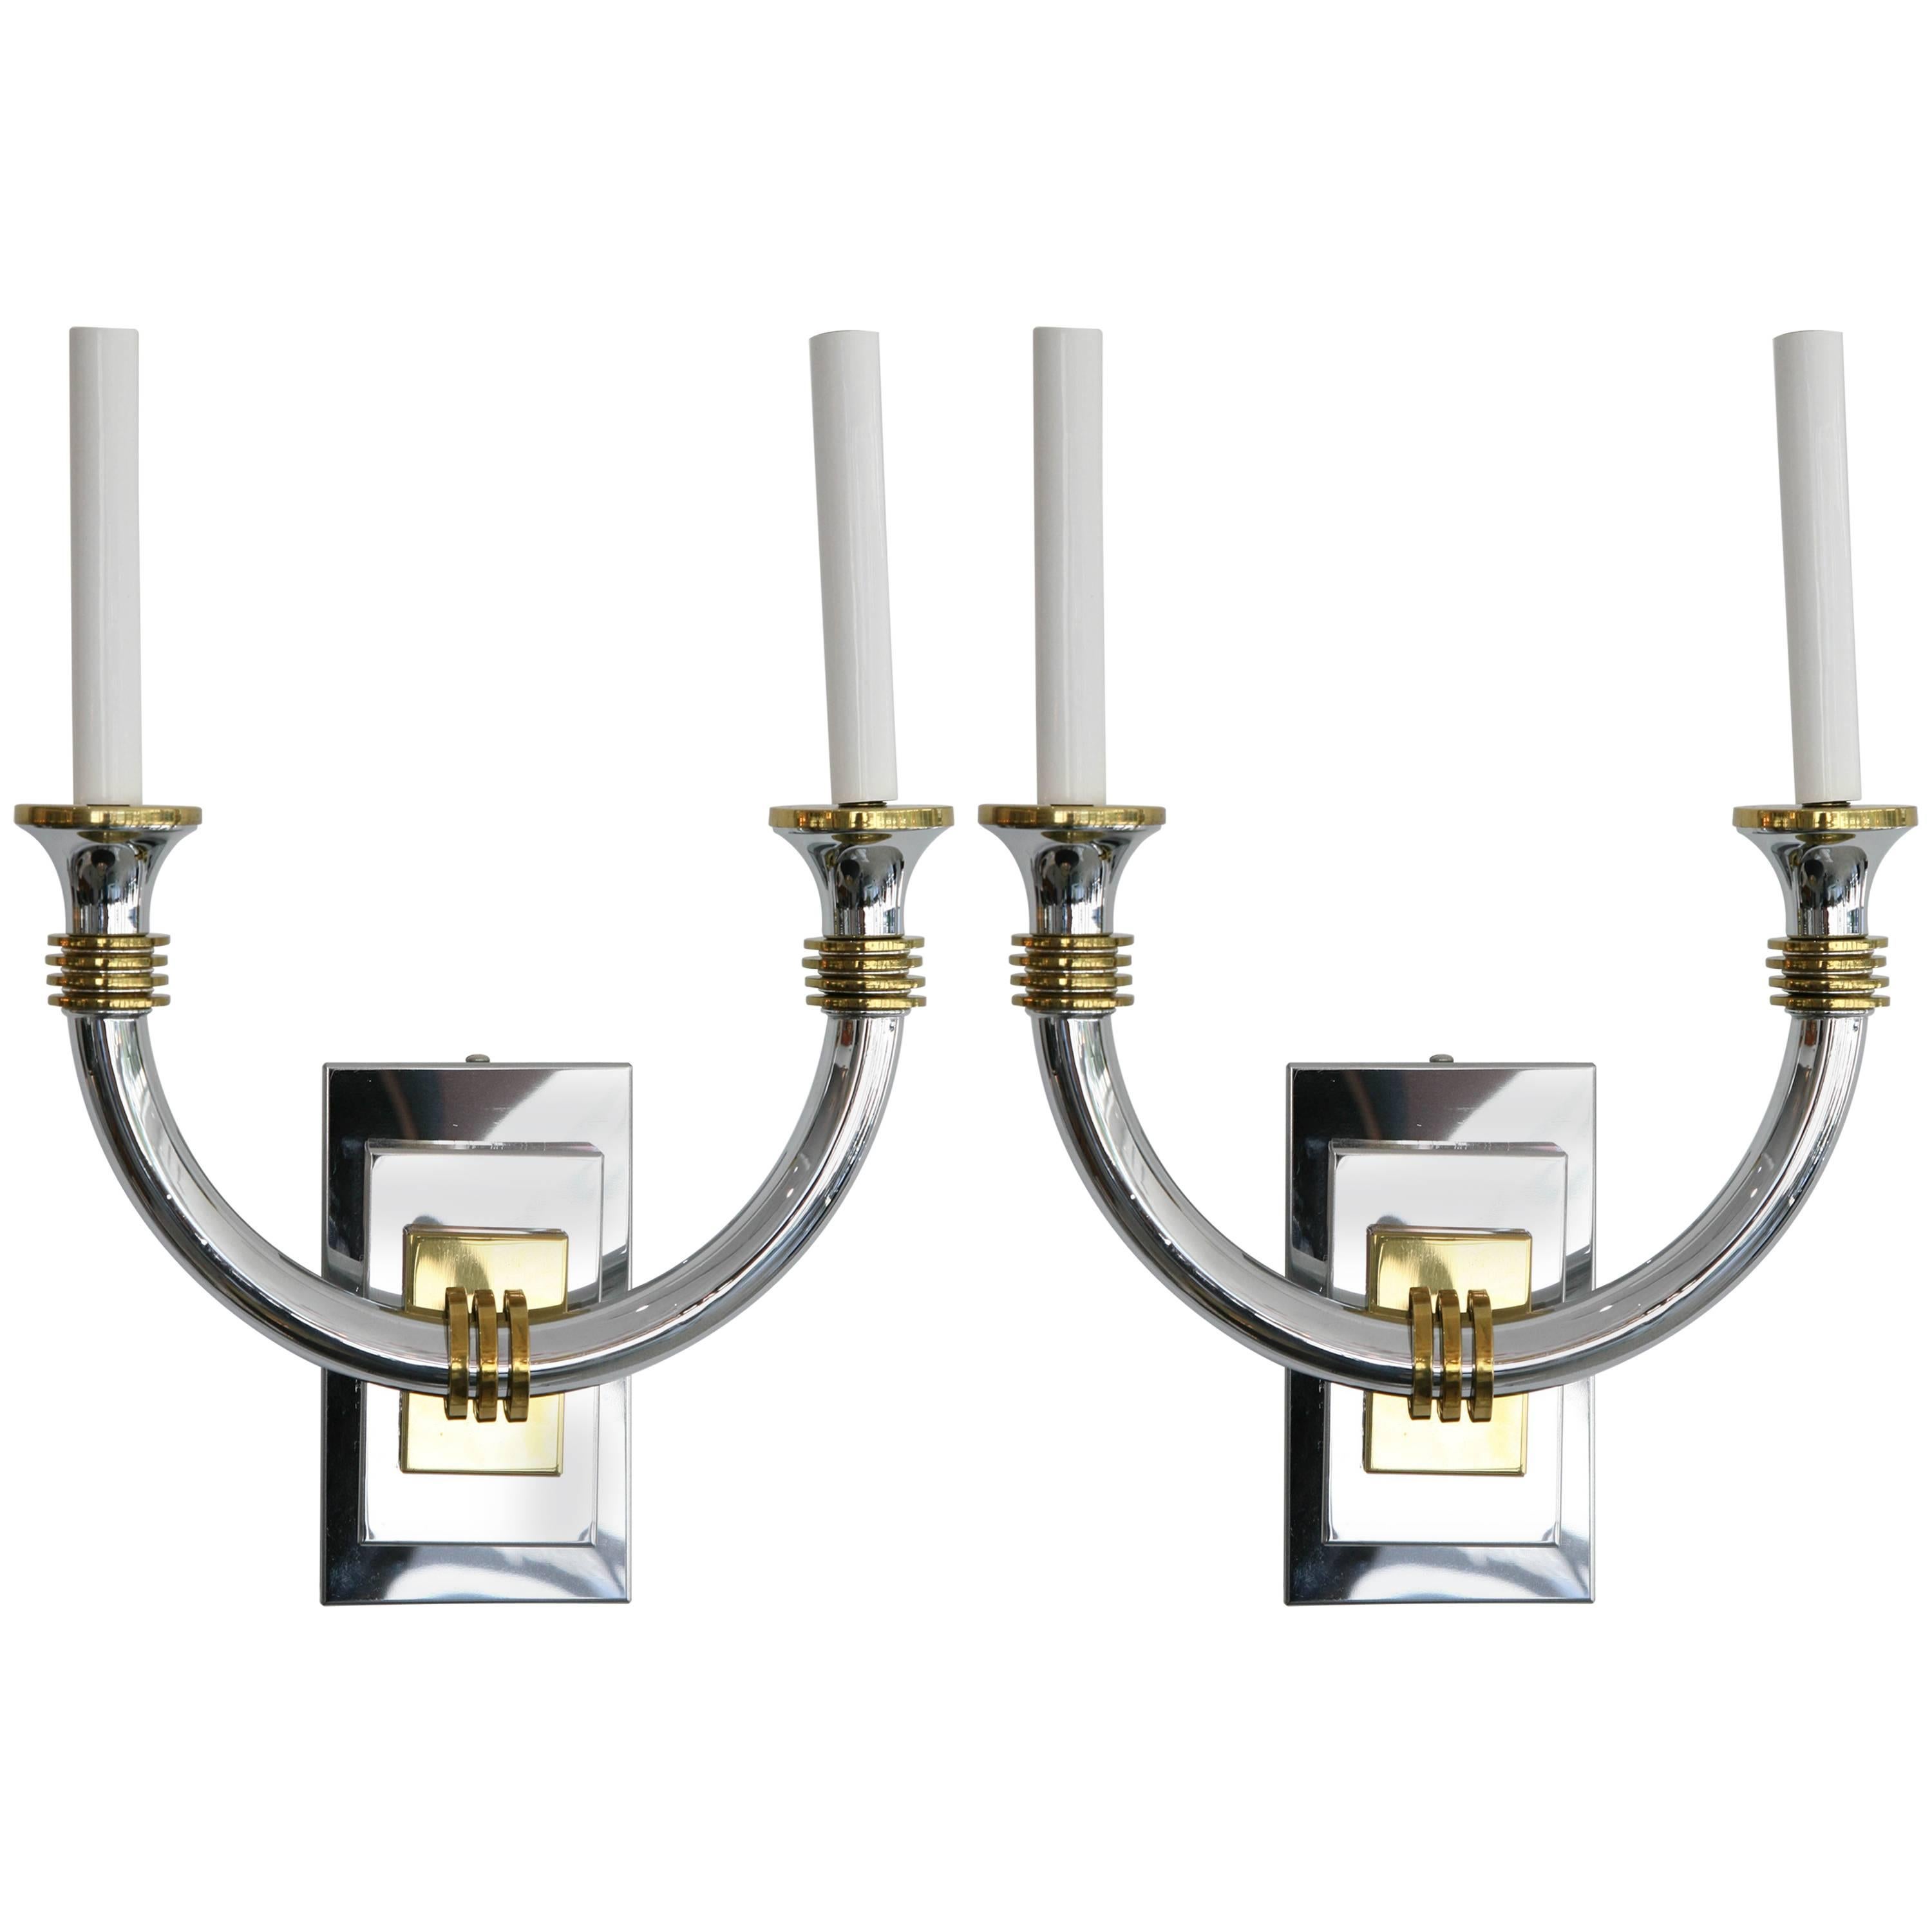 Pair of Art Deco Style Wall Sconces, Polished Brass and Chrome